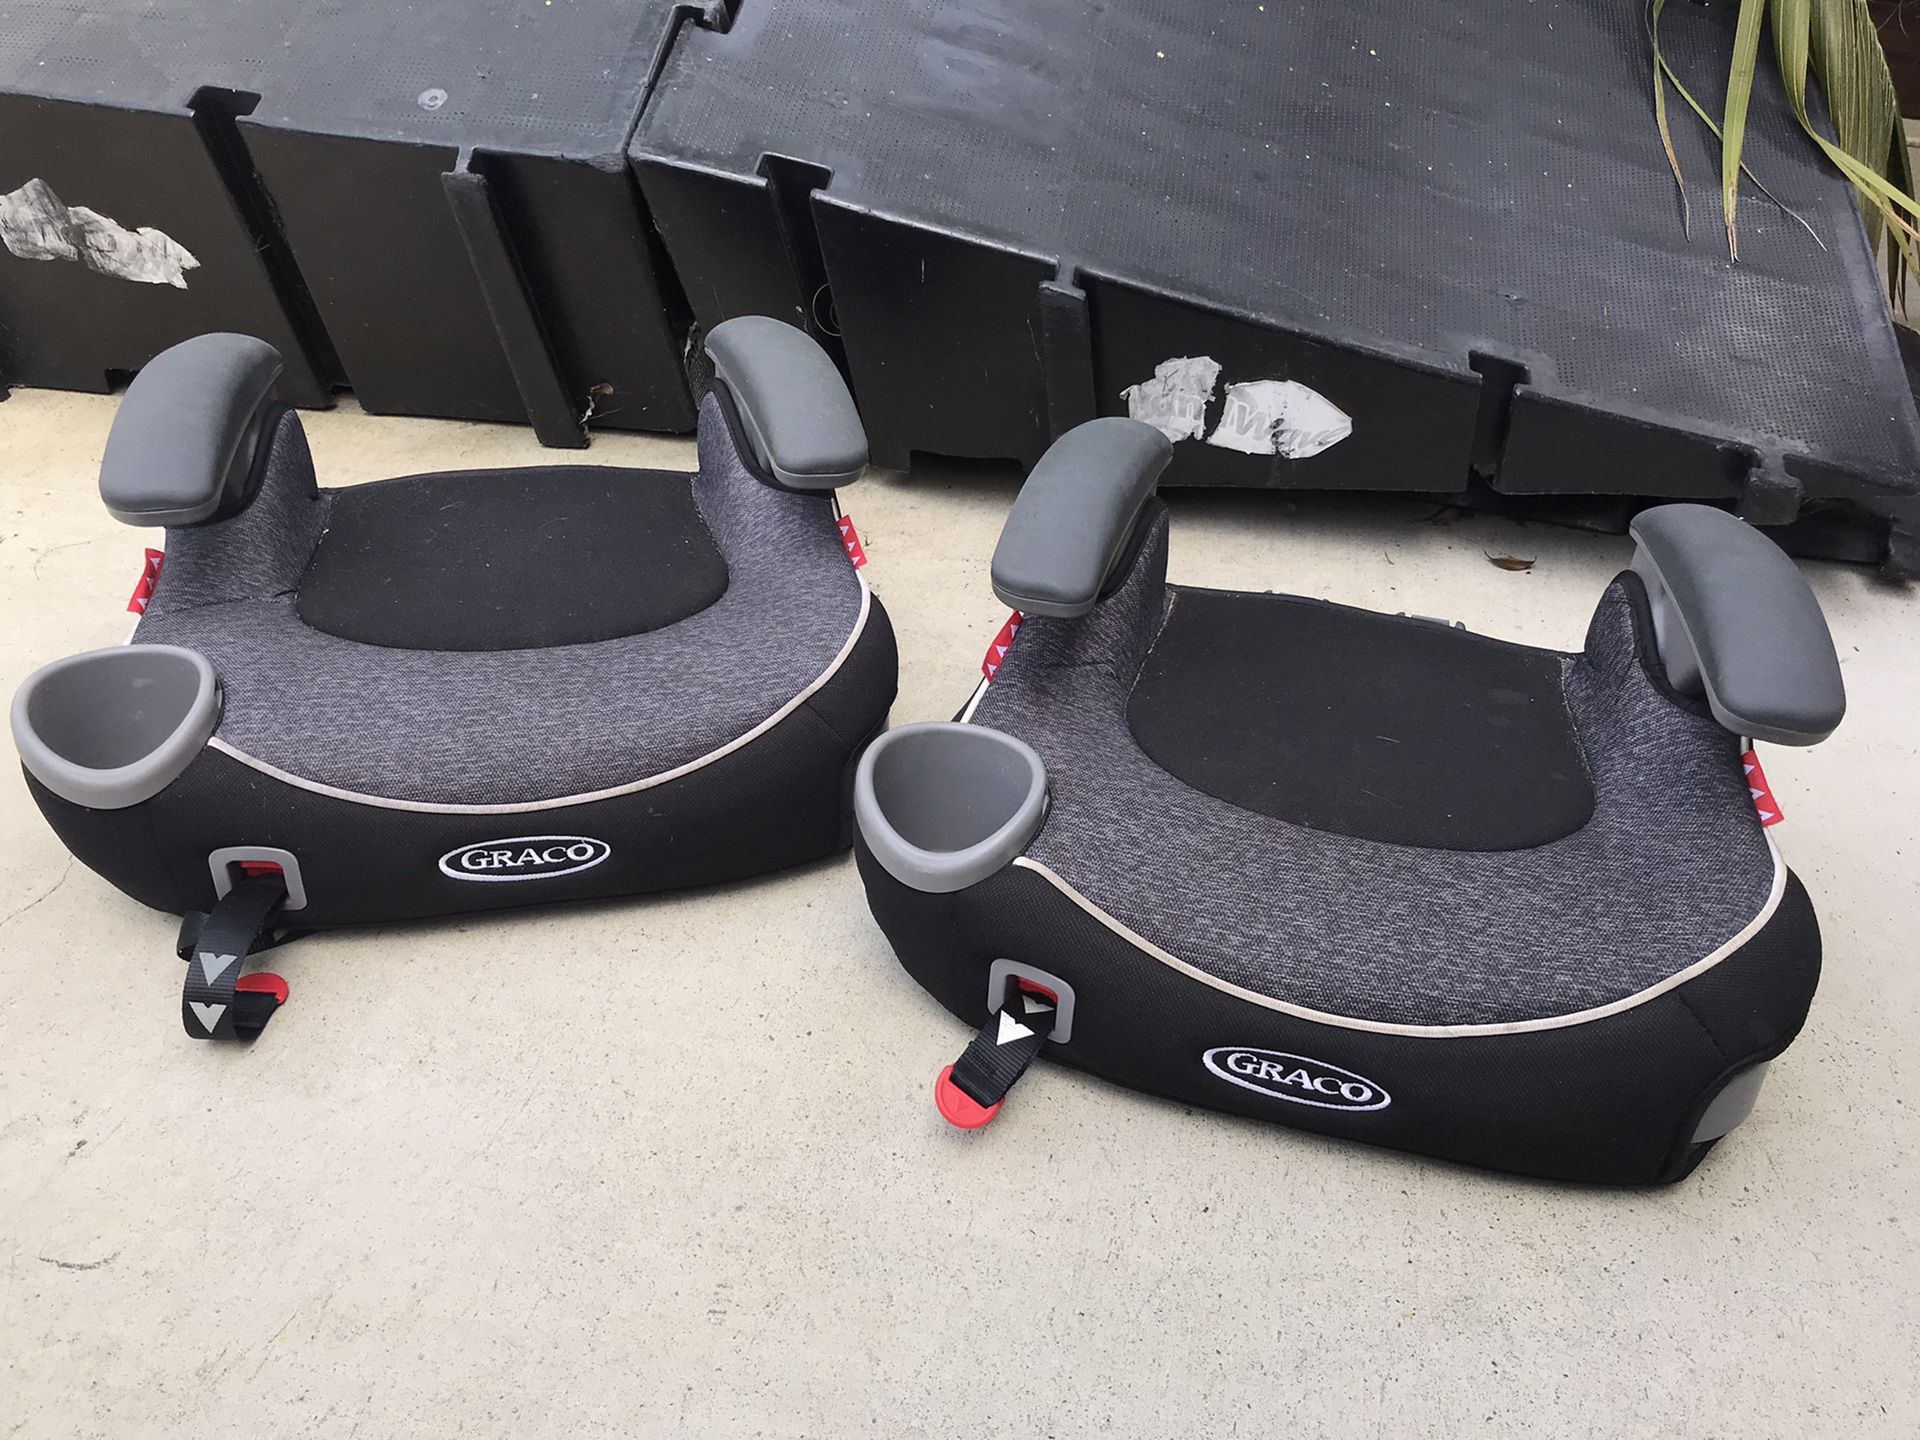 Two matching Graco Booster car seats